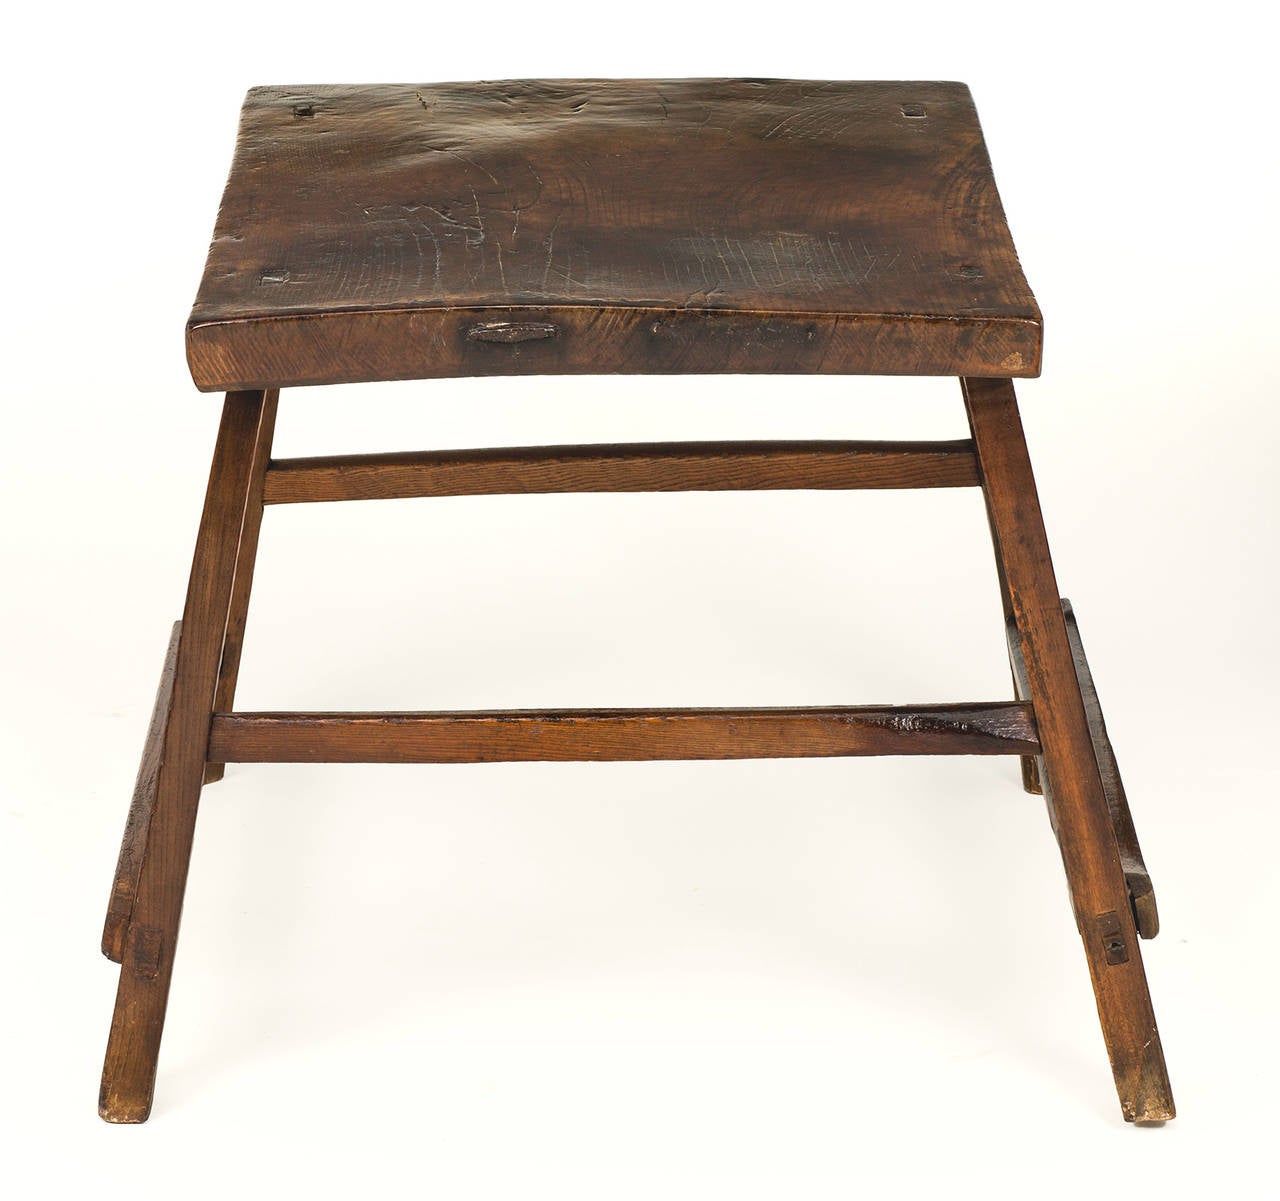 Early 20th Century Primitive Chinese Elmwood Table or Bench